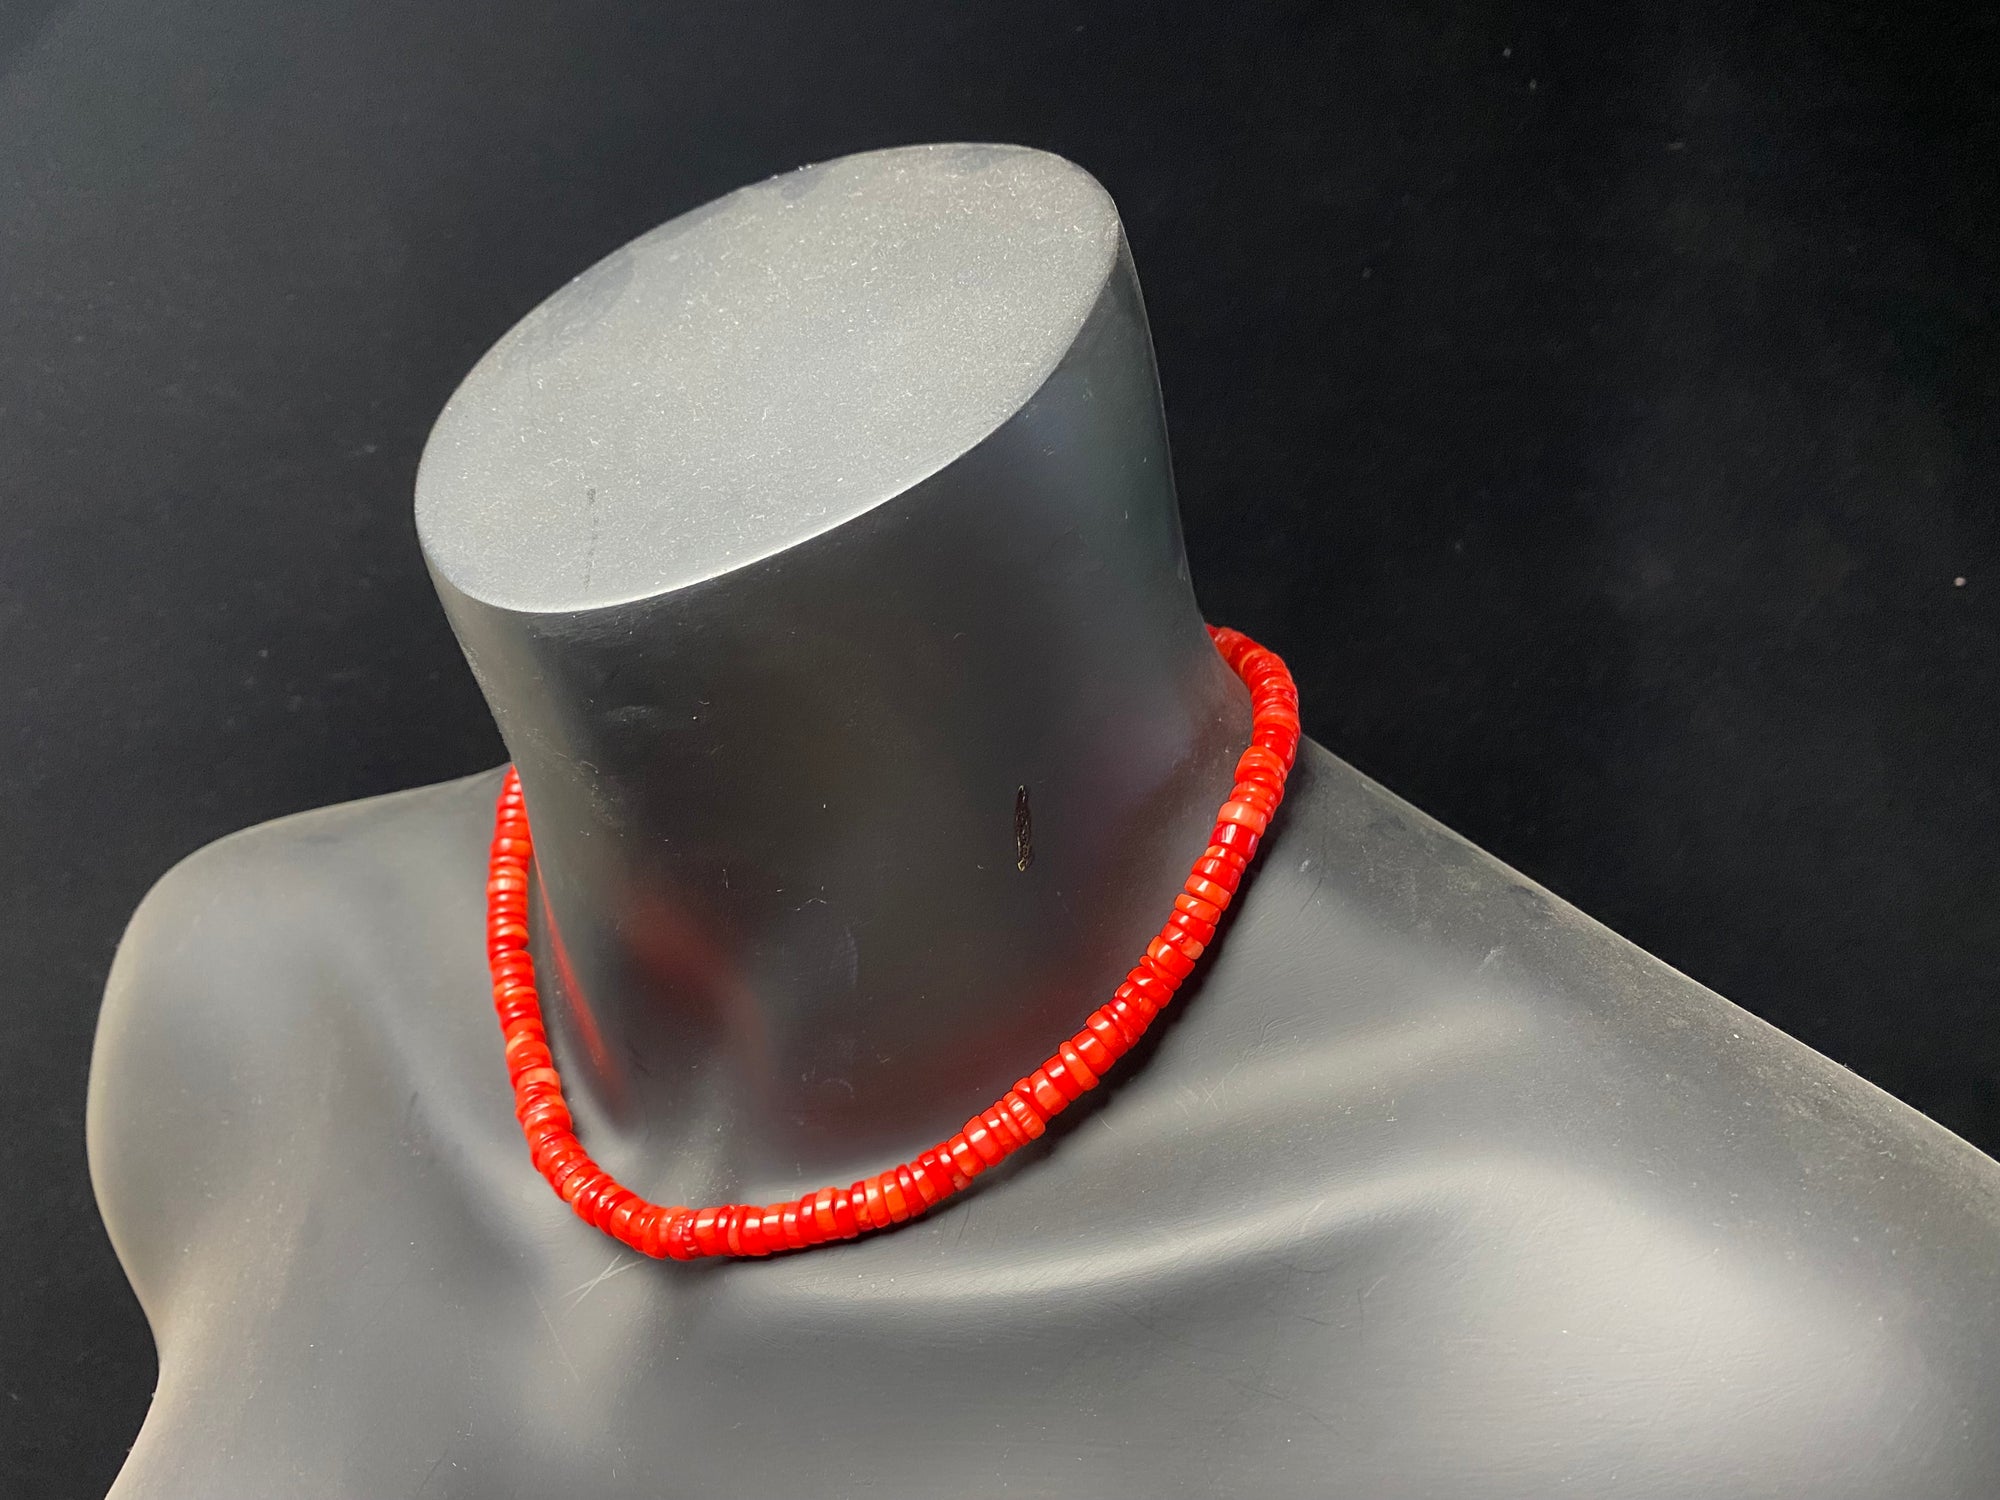 Our simple coral necklace features red coral heshi beads finished with a sterling silver beads and hook clasp. A smart and elegant Southwest style choker that can be worn by men or women.  Bamboo coral is dyed and responsibly sourced from the Pacific Ocean. Length 45 cm (17.75"), diameter of beads 7 mm